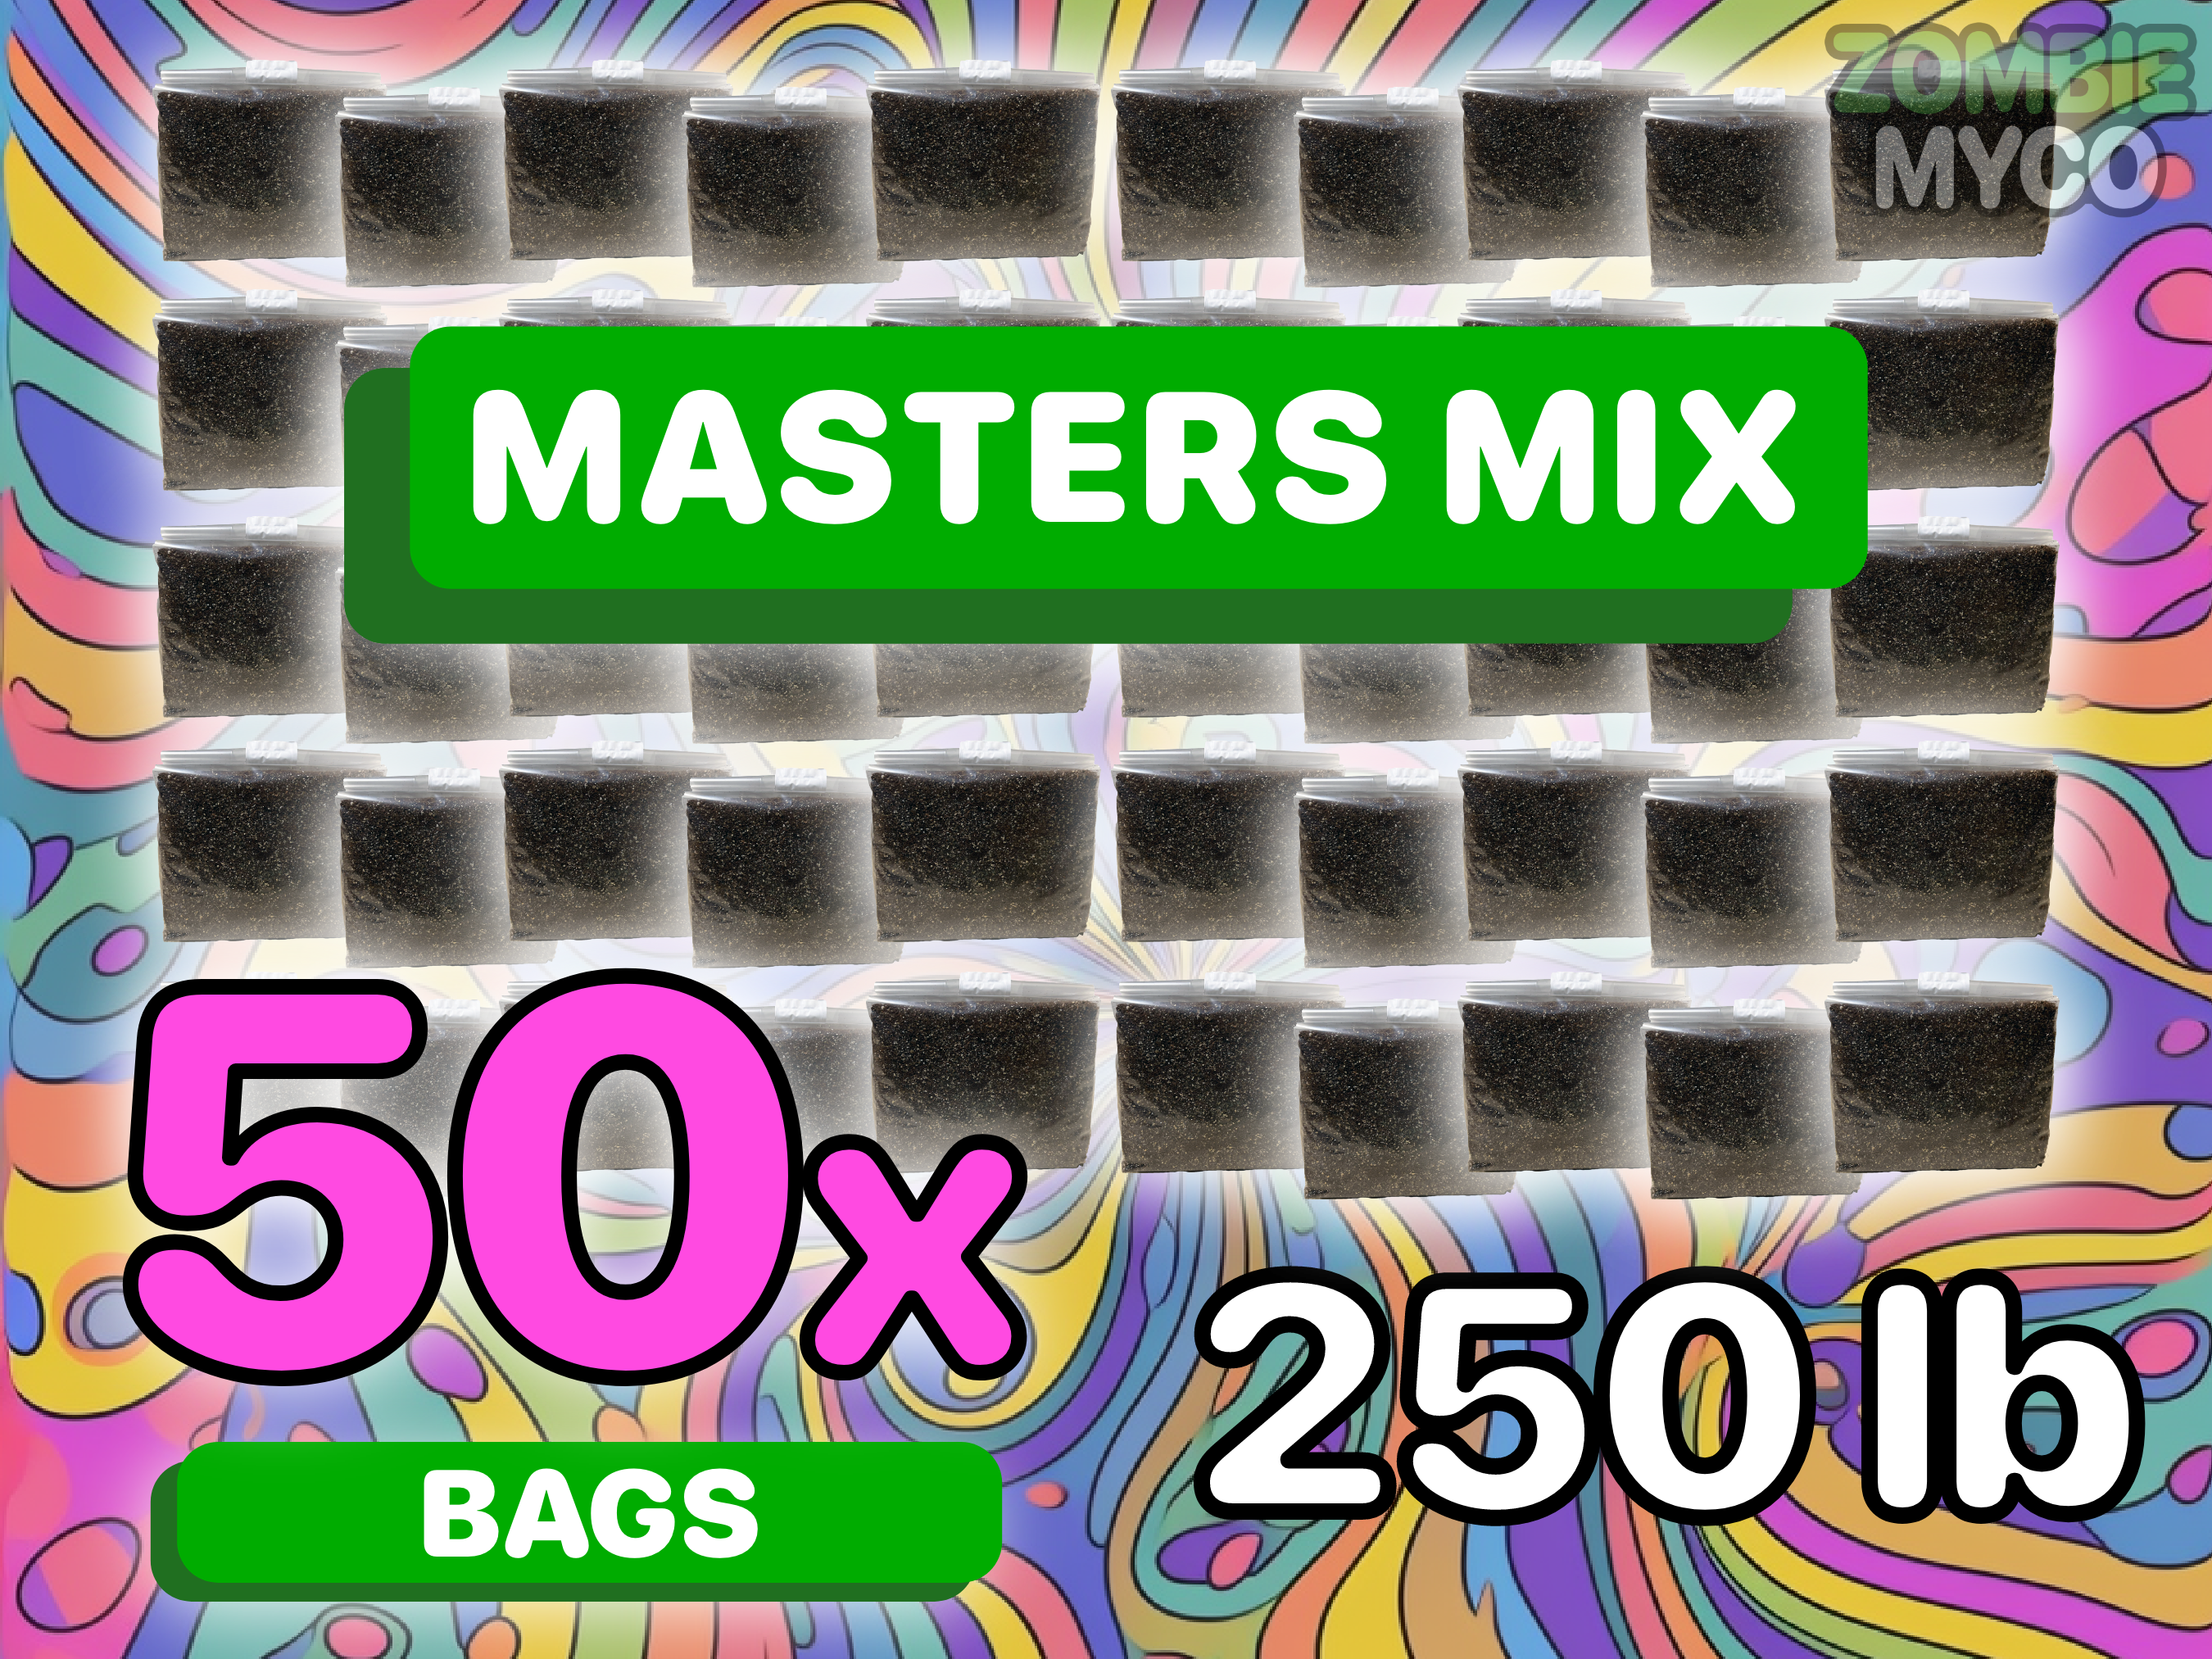 50X BAGS OF MASTERS MIX MUSHROOM SUBSTRATE (250LB)